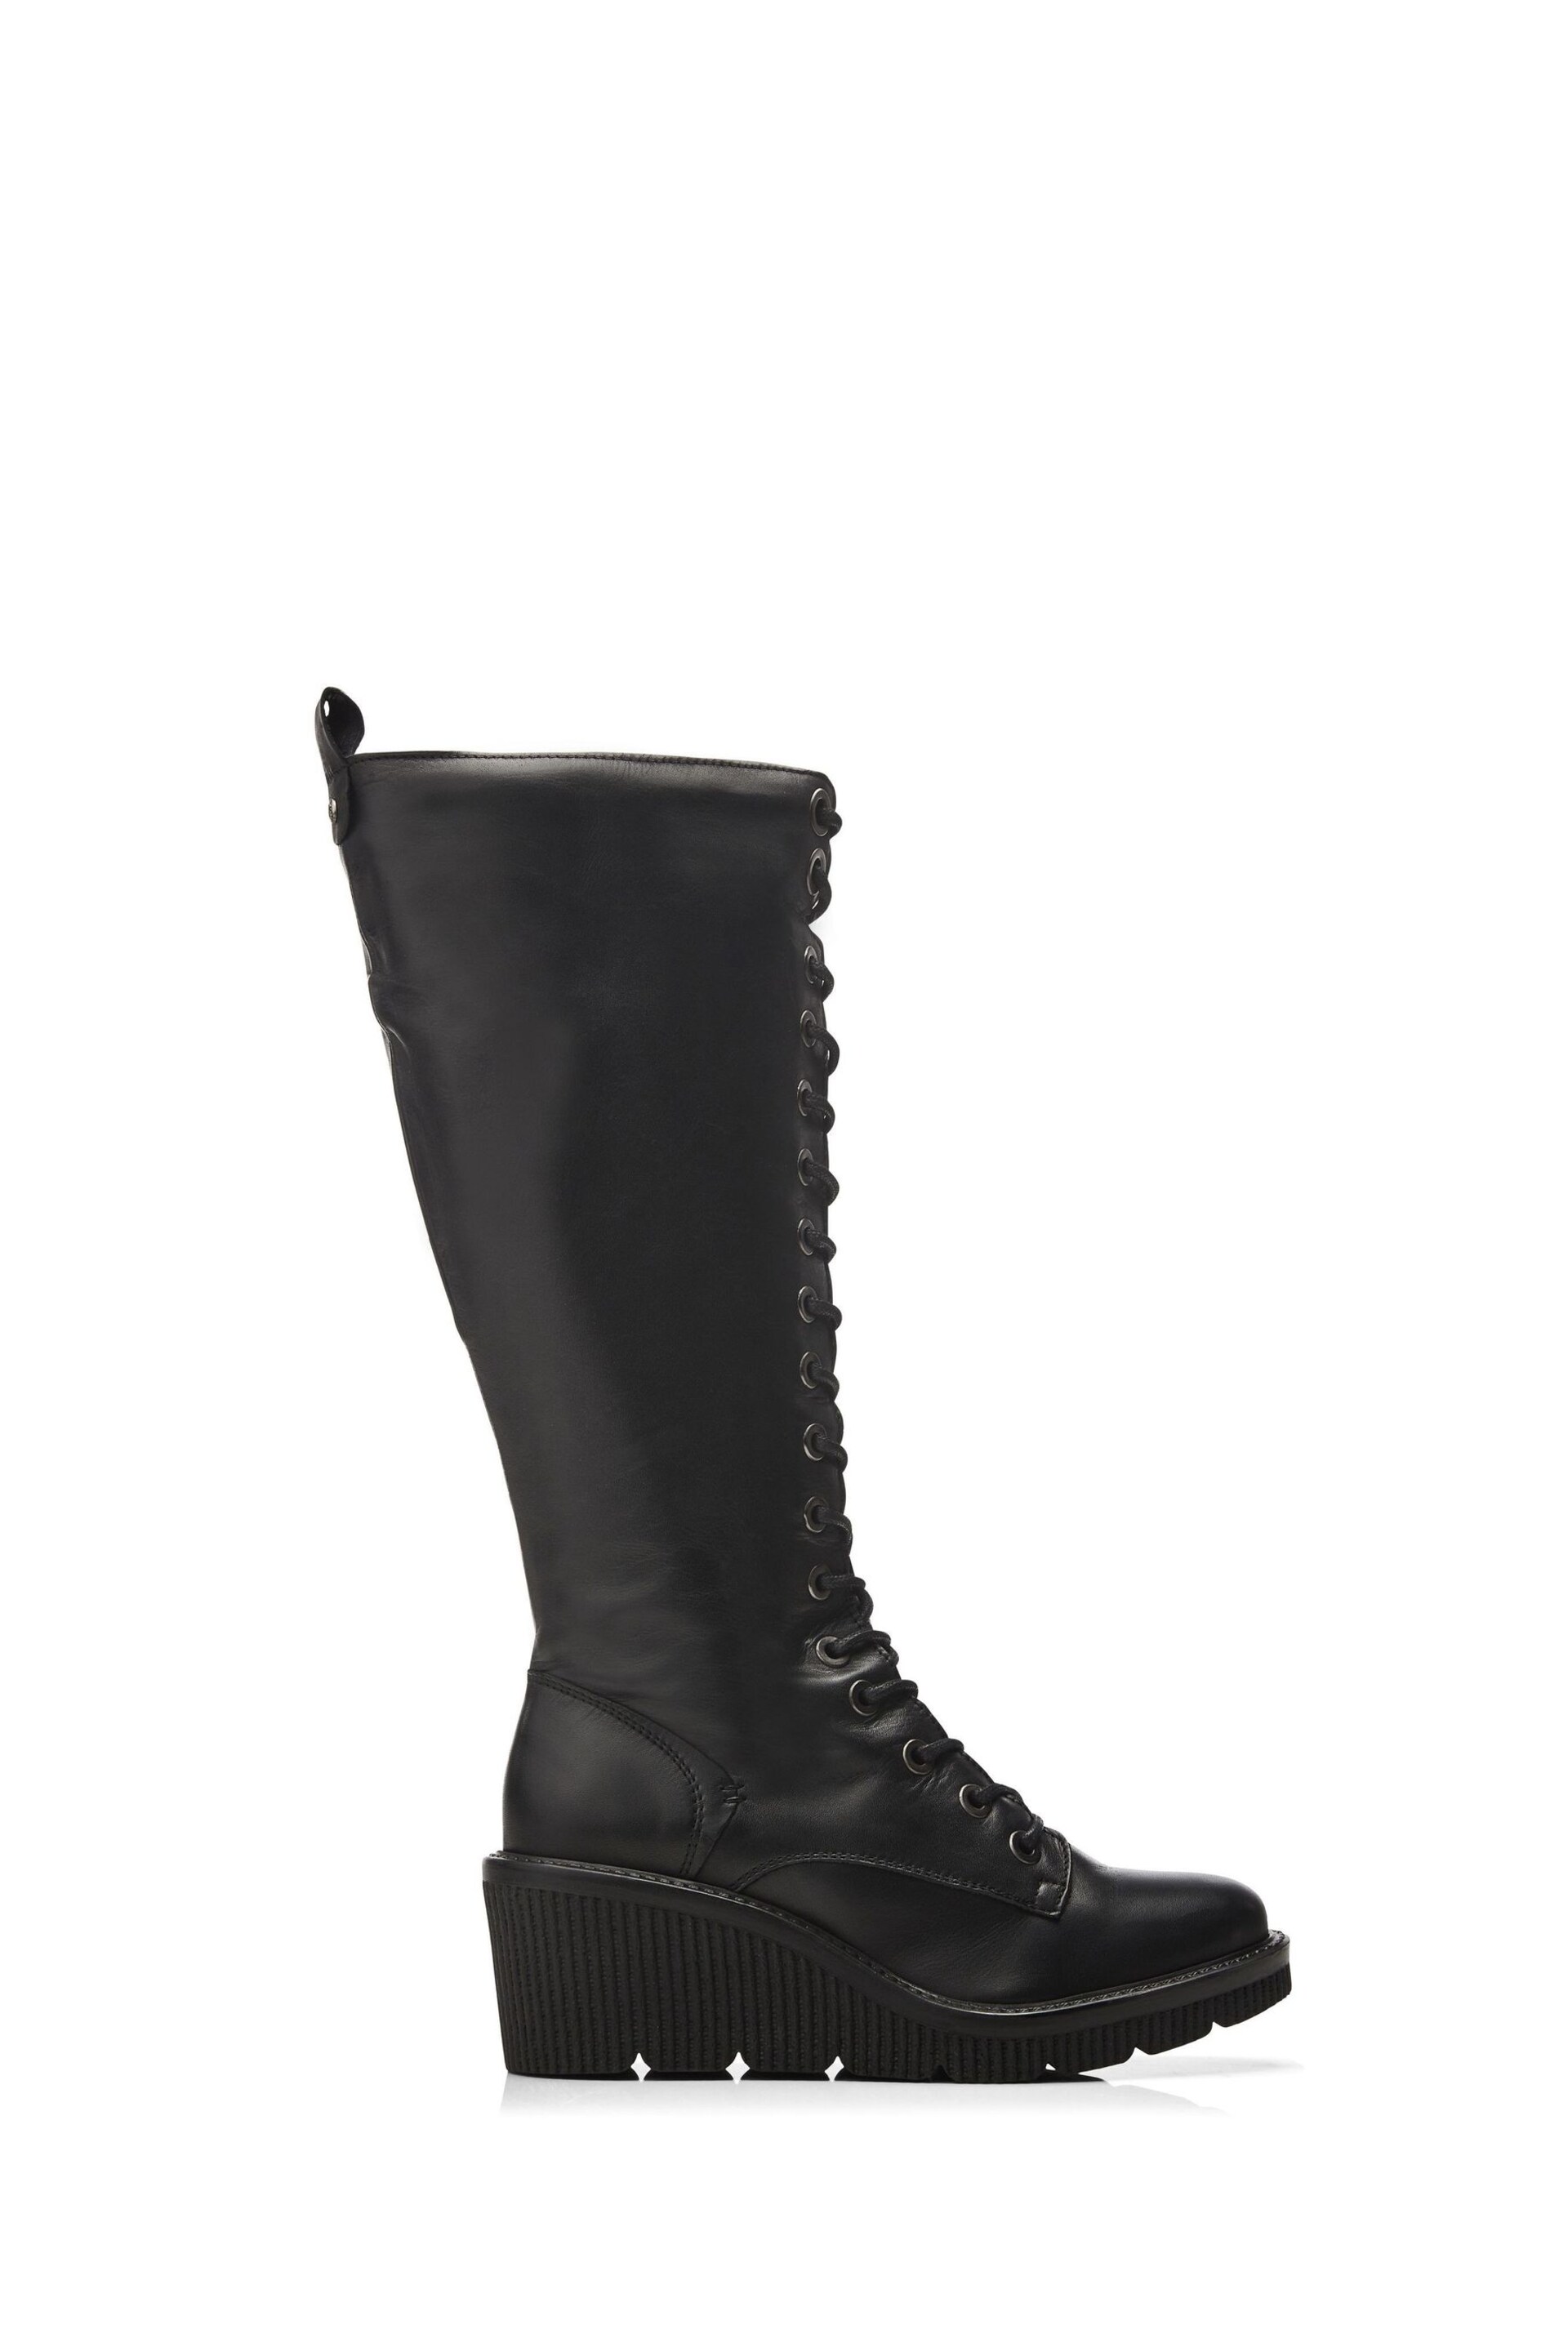 Moda in Pelle Halliyah Long Lace up Bezzie Crepe Wedge Black Boots - Image 1 of 4